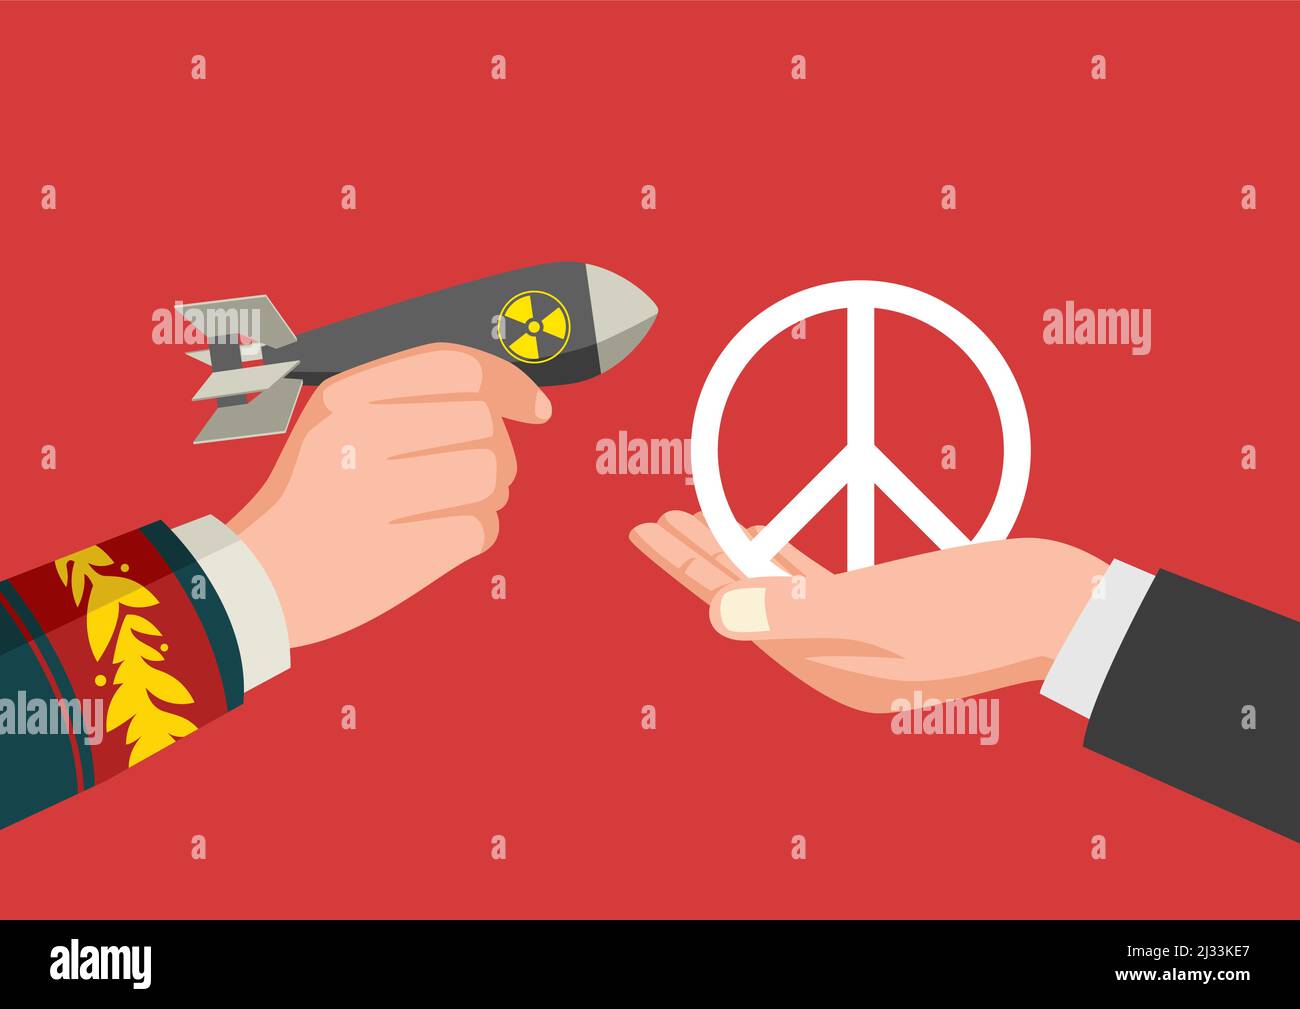 Illustration of a man hand in military uniform holding a nuclear bomb and a hand holding a peace symbol, offering, war and peace symbol Stock Vector